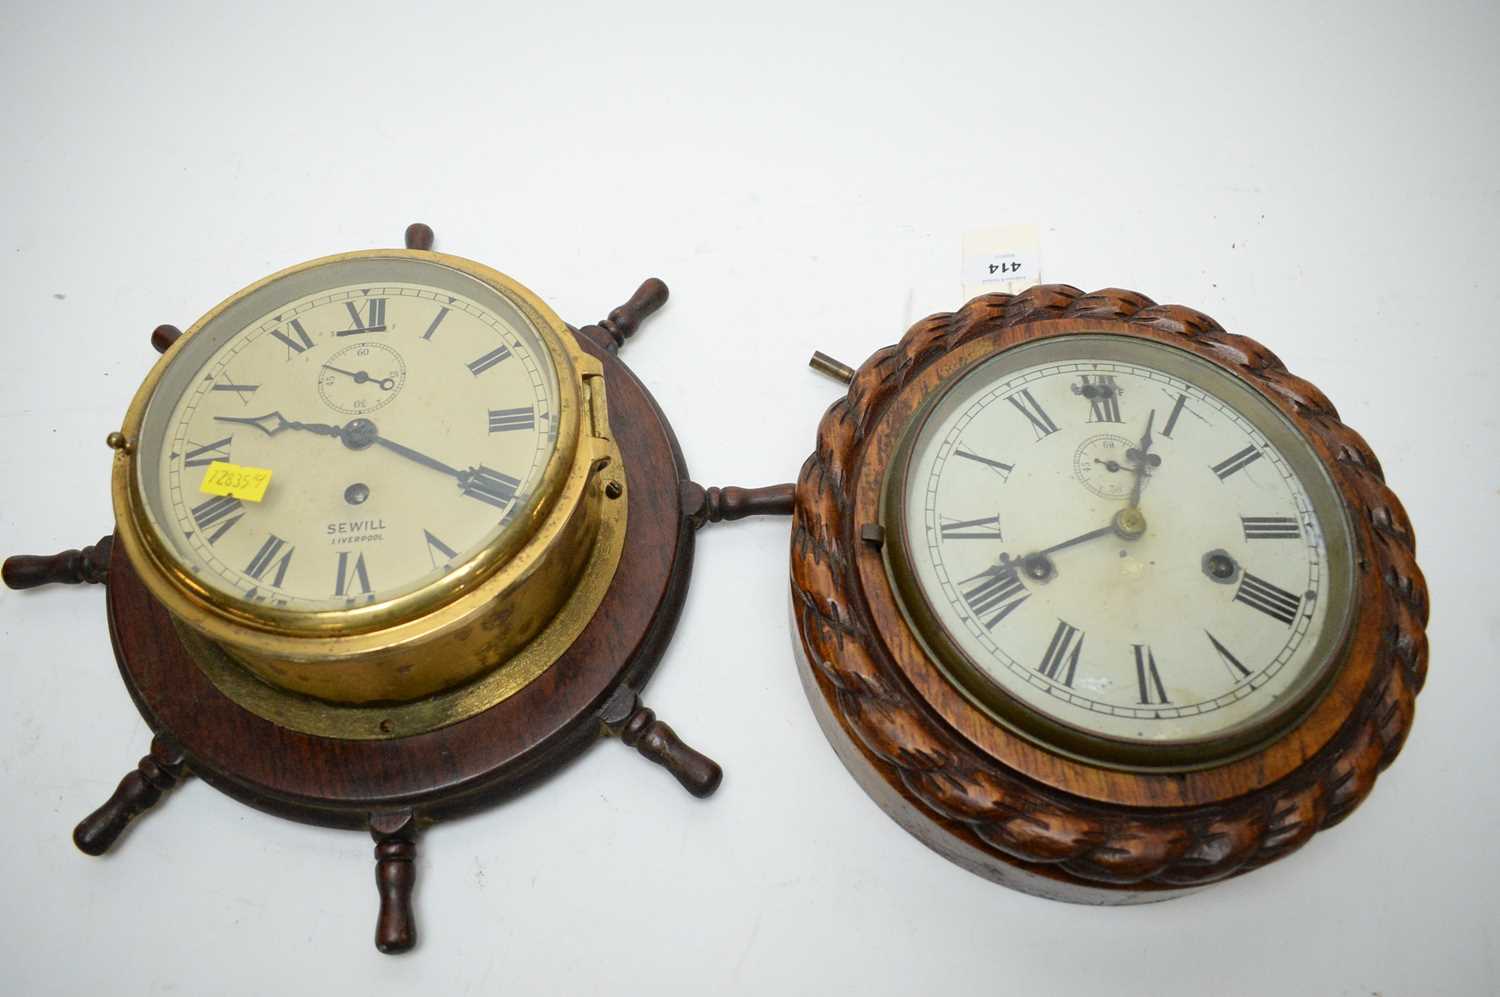 Lot 414 - A Sewill Liverpool brass cased ships clock and another.